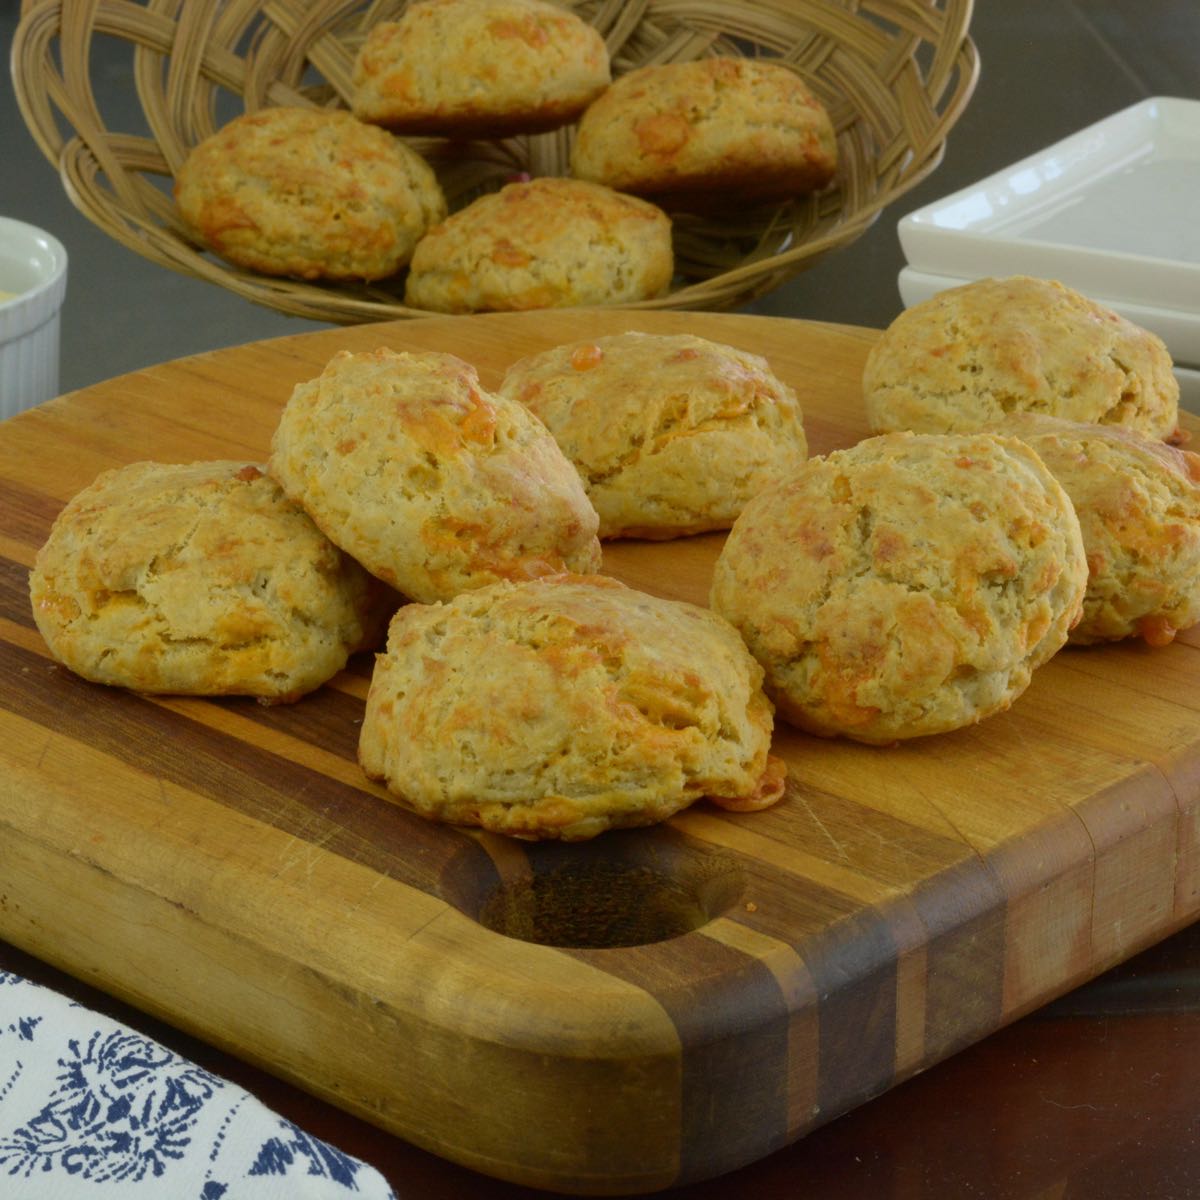 Gluten free Cheese Biscuits served on a board with a basket behind them holding more.